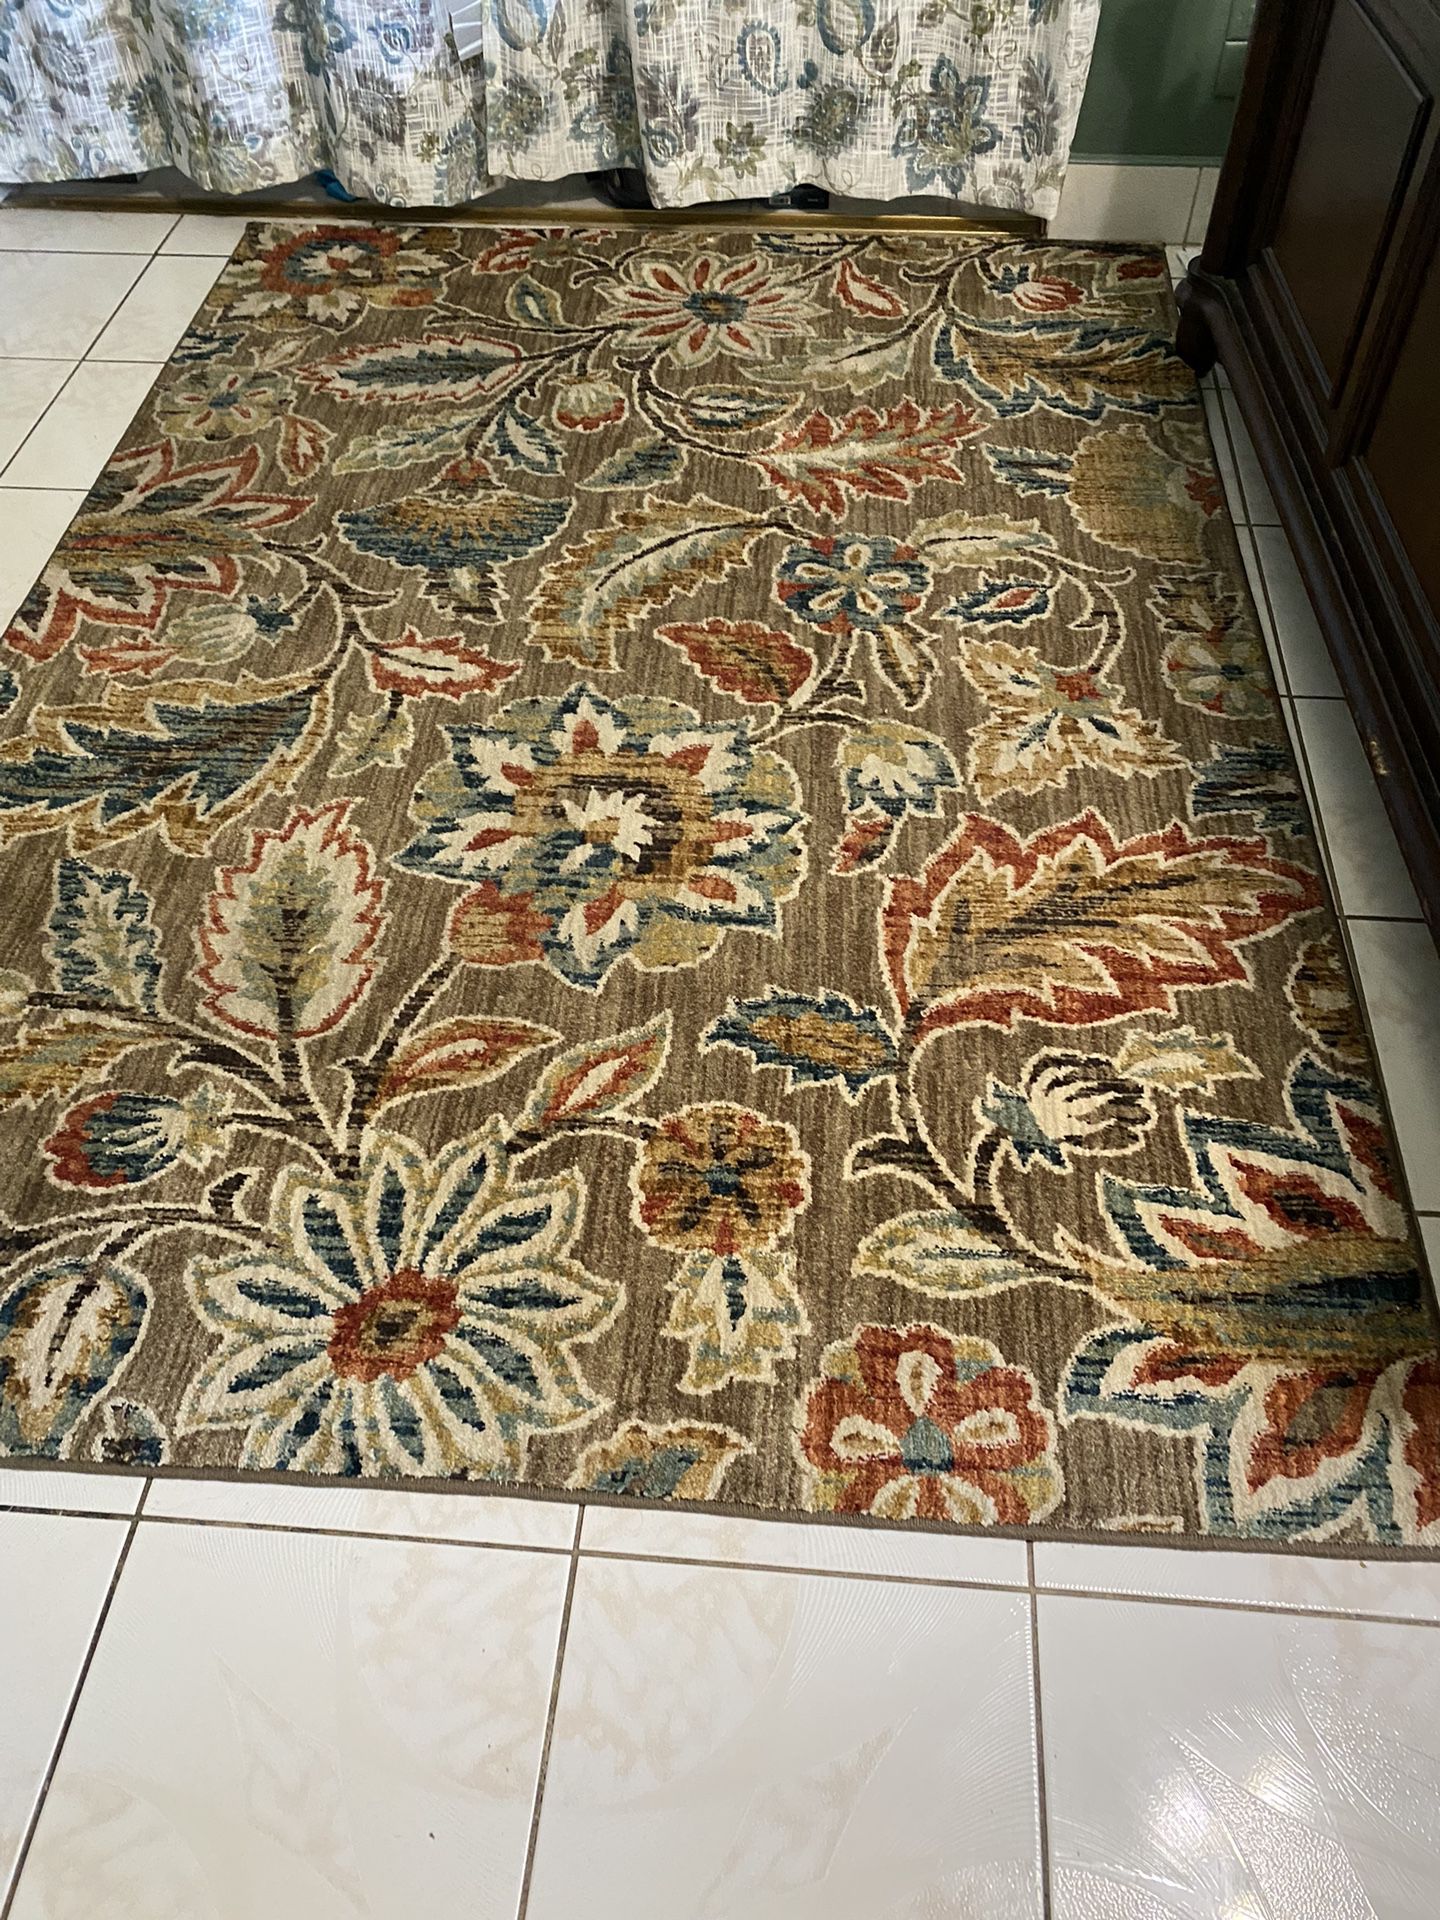 Oriental  Carpet For Family Room Or  Living. Almost New. Never Use. Beautiful https://offerup.com/redirect/?o=Q29sb3IuTm8= Smoking No pets  No Childre